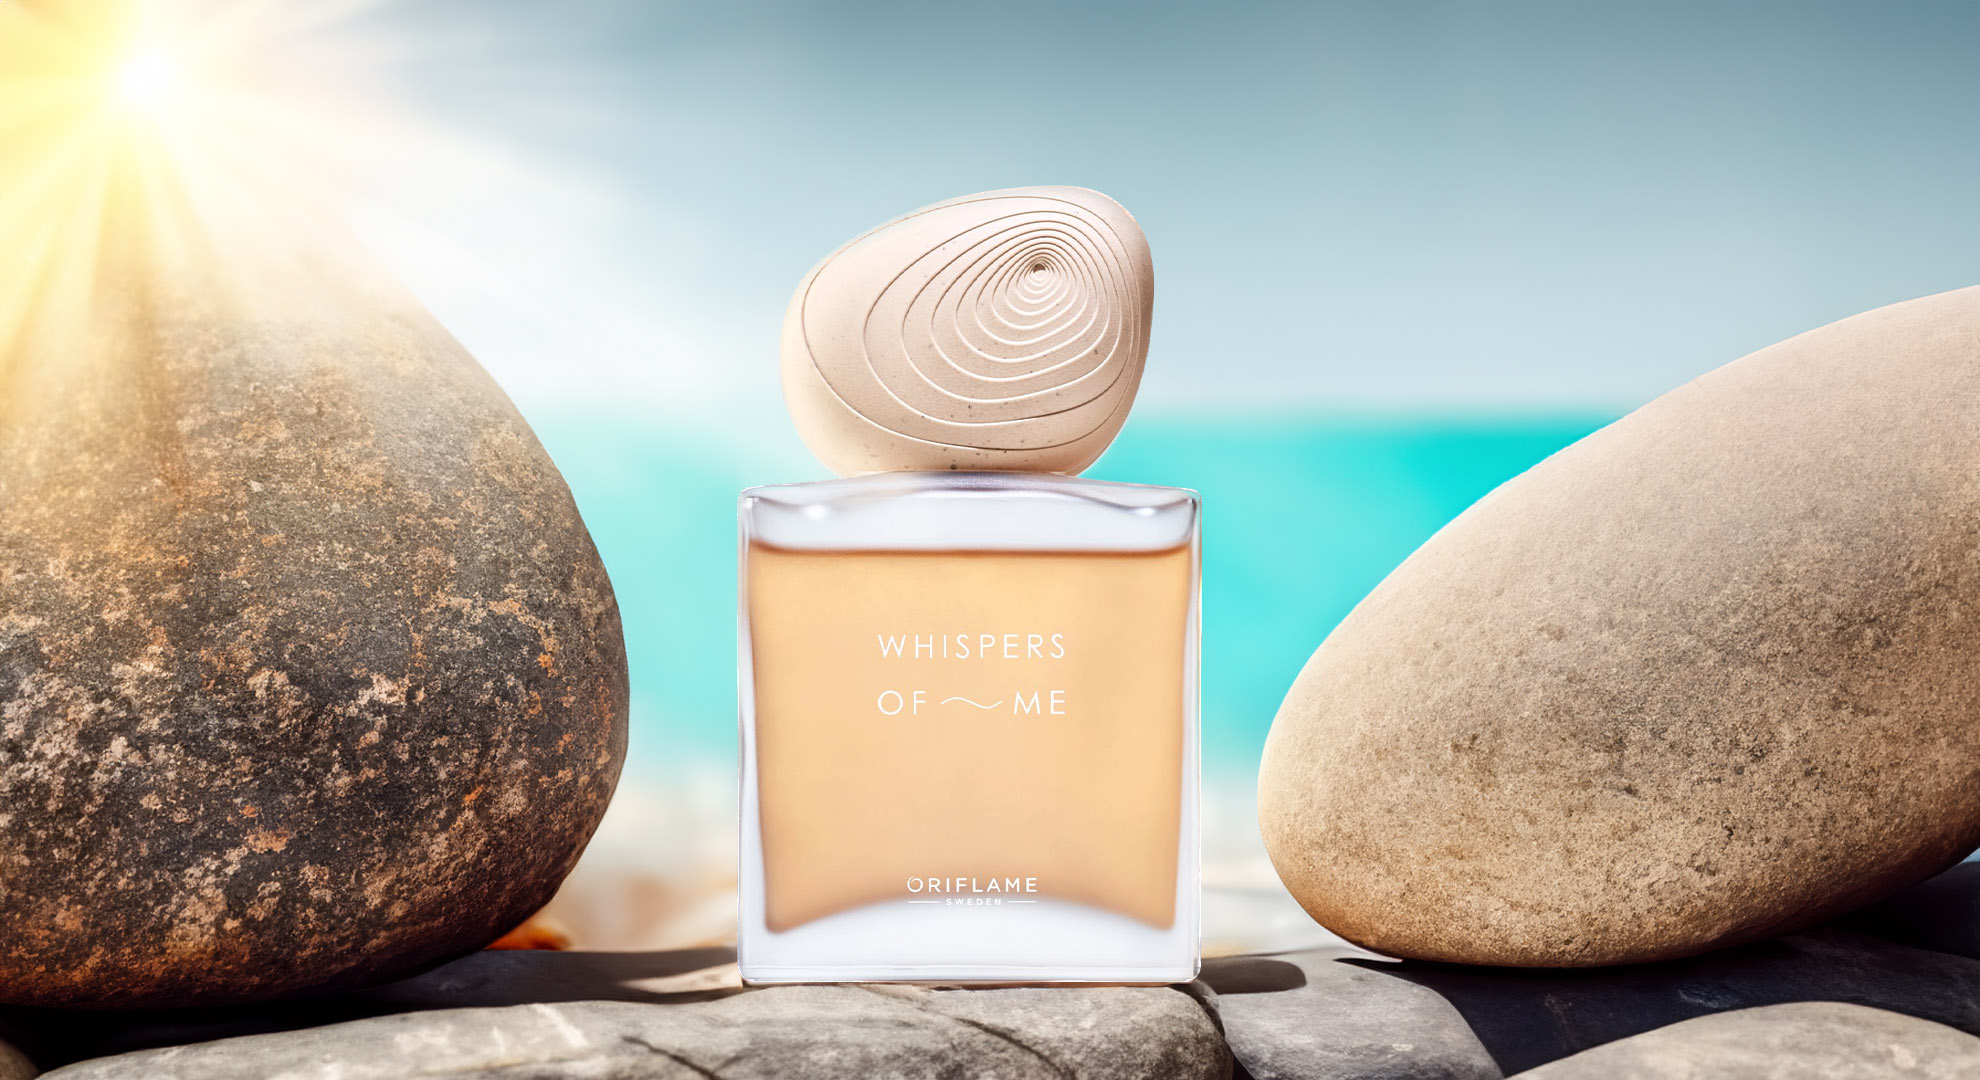 Whispers of Mystery: Oriflame’s Whispers Of Me – An Olfactory Work of Art